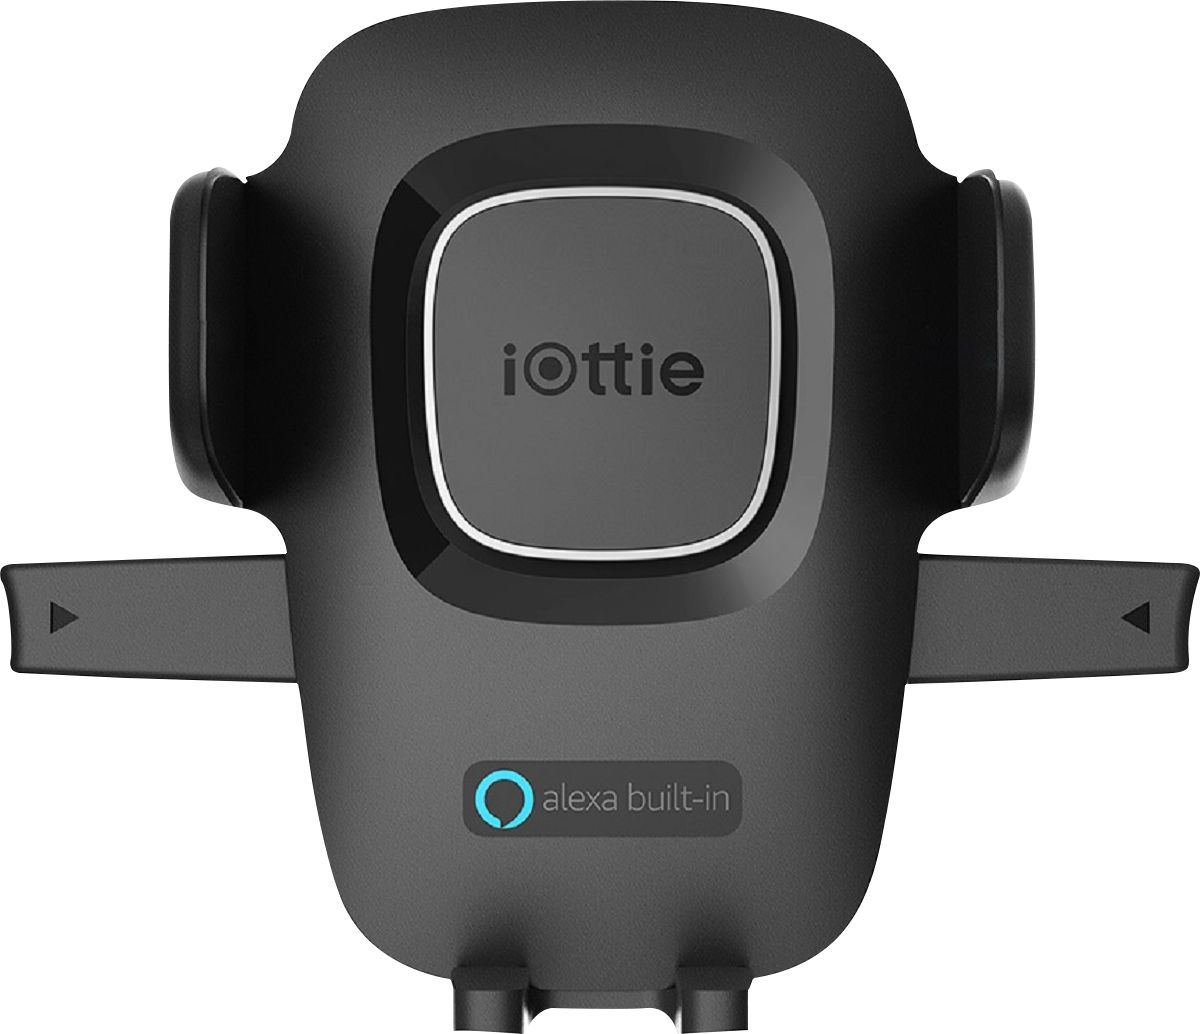 Angle View: iOttie - Easy One Touch Connect Alexa Enabled Car Mount for Mobile Phones - Black